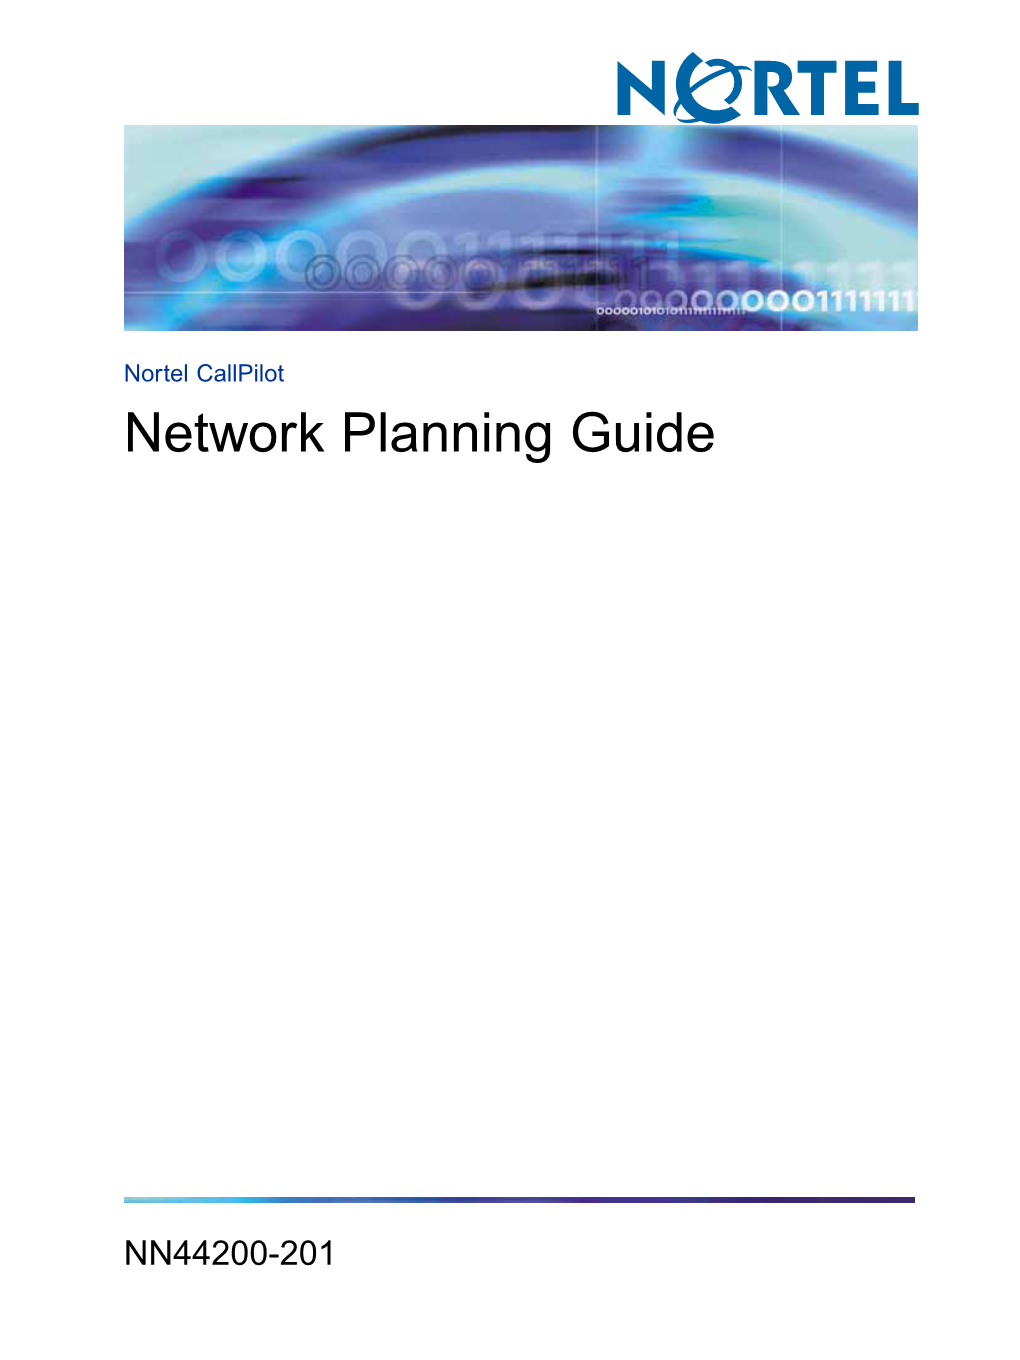 Network Planning Guide